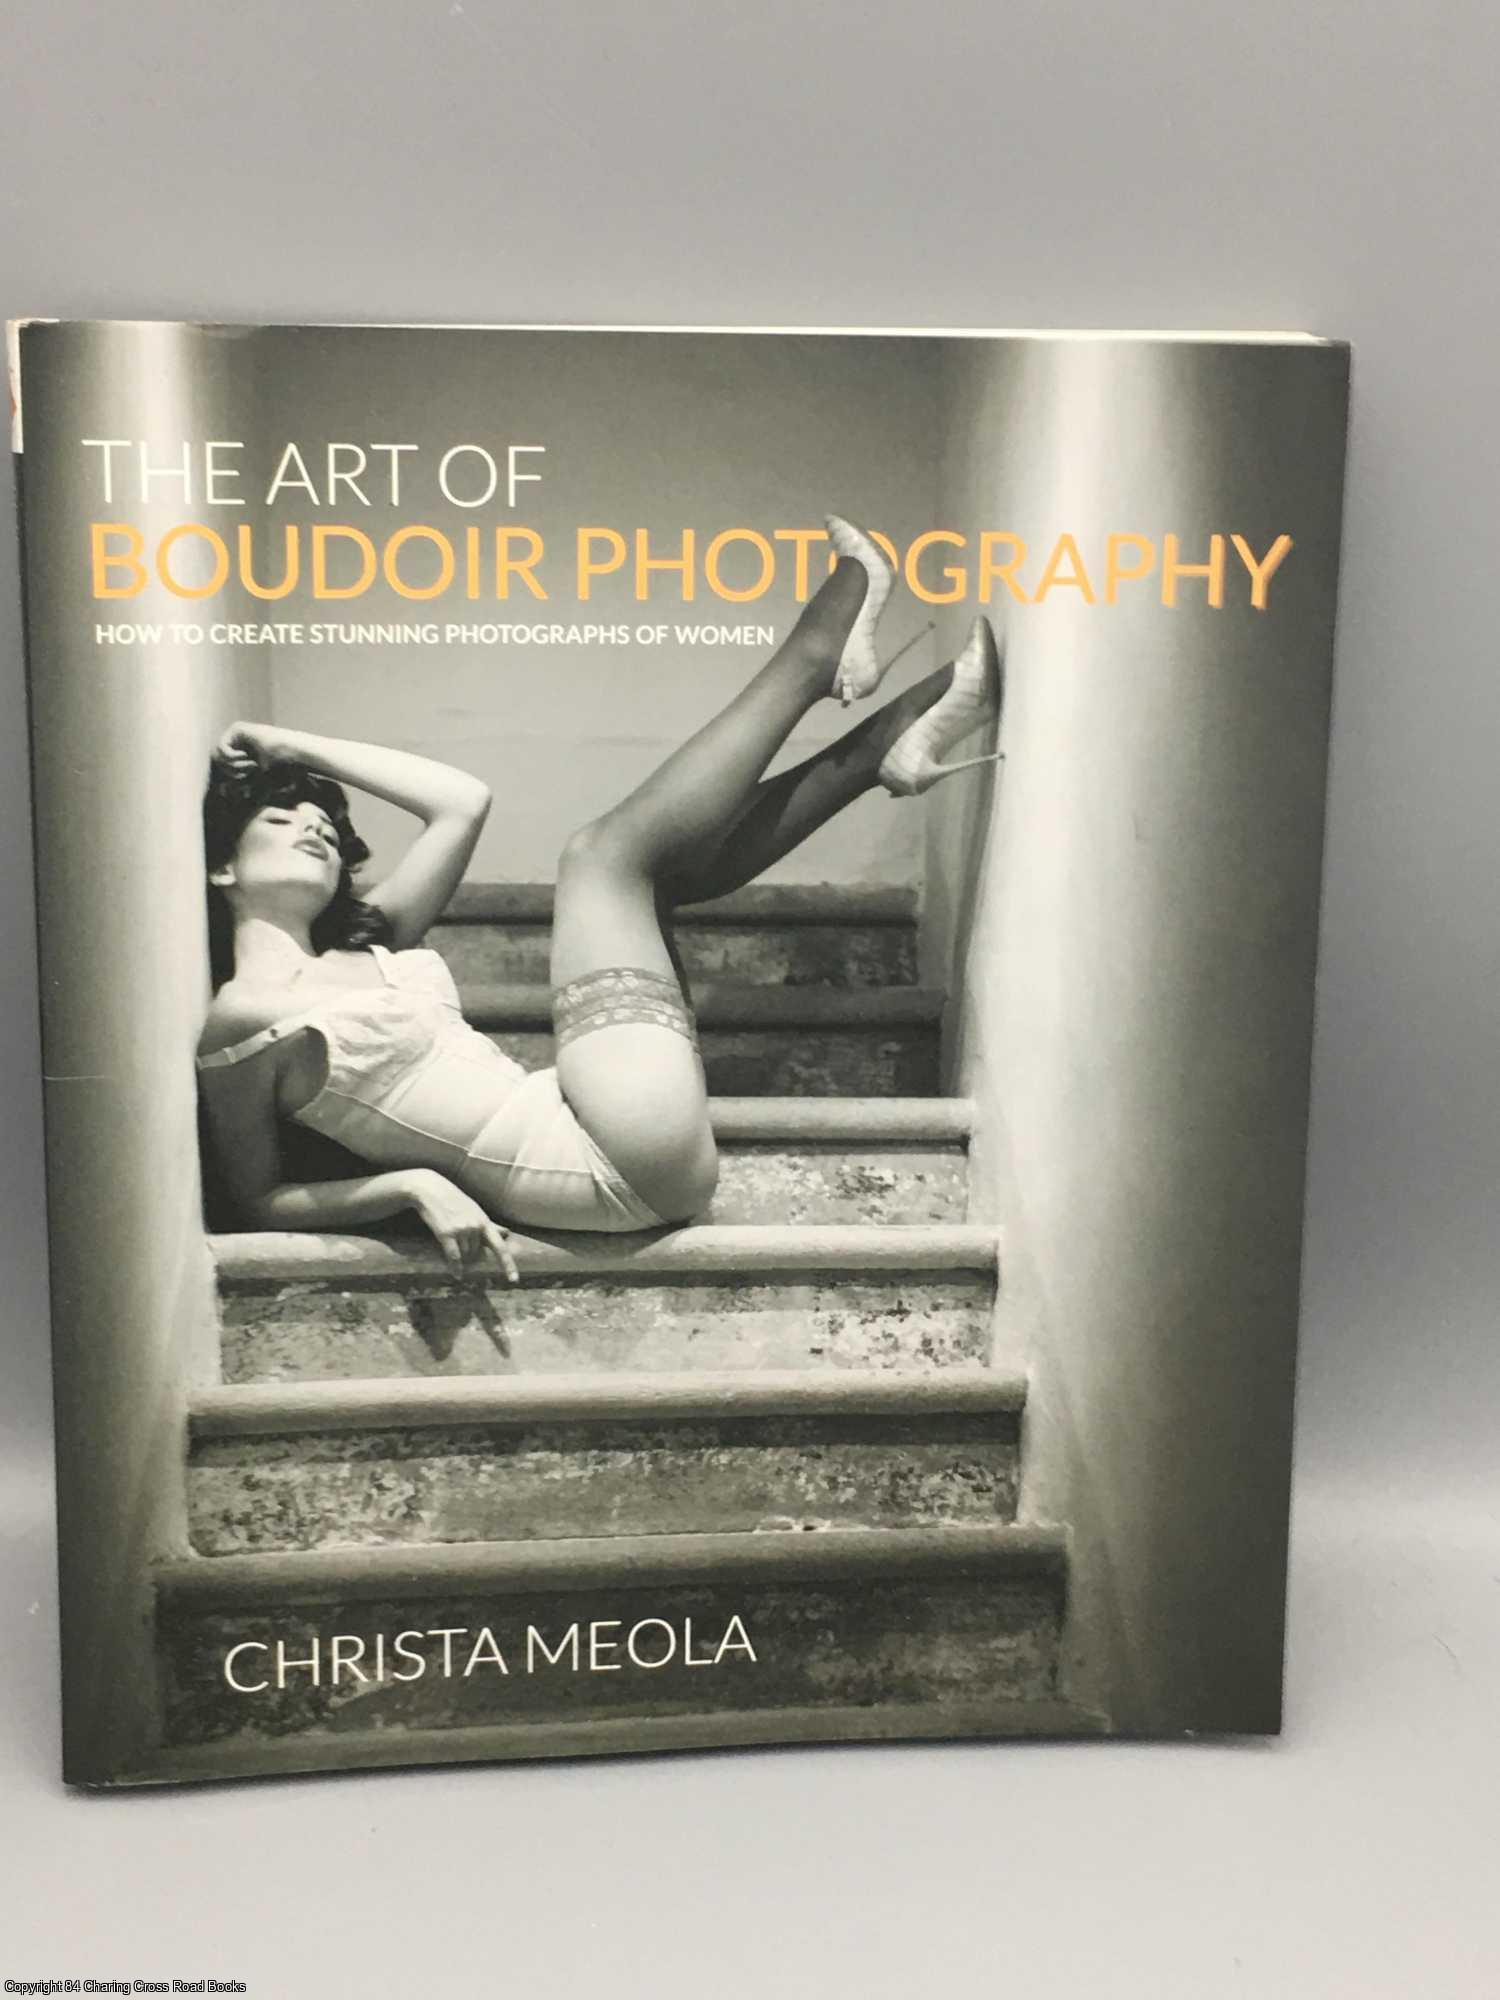 Meola, Christa - The Art of Boudoir Photography: How to Create Stunning Photographs of Women